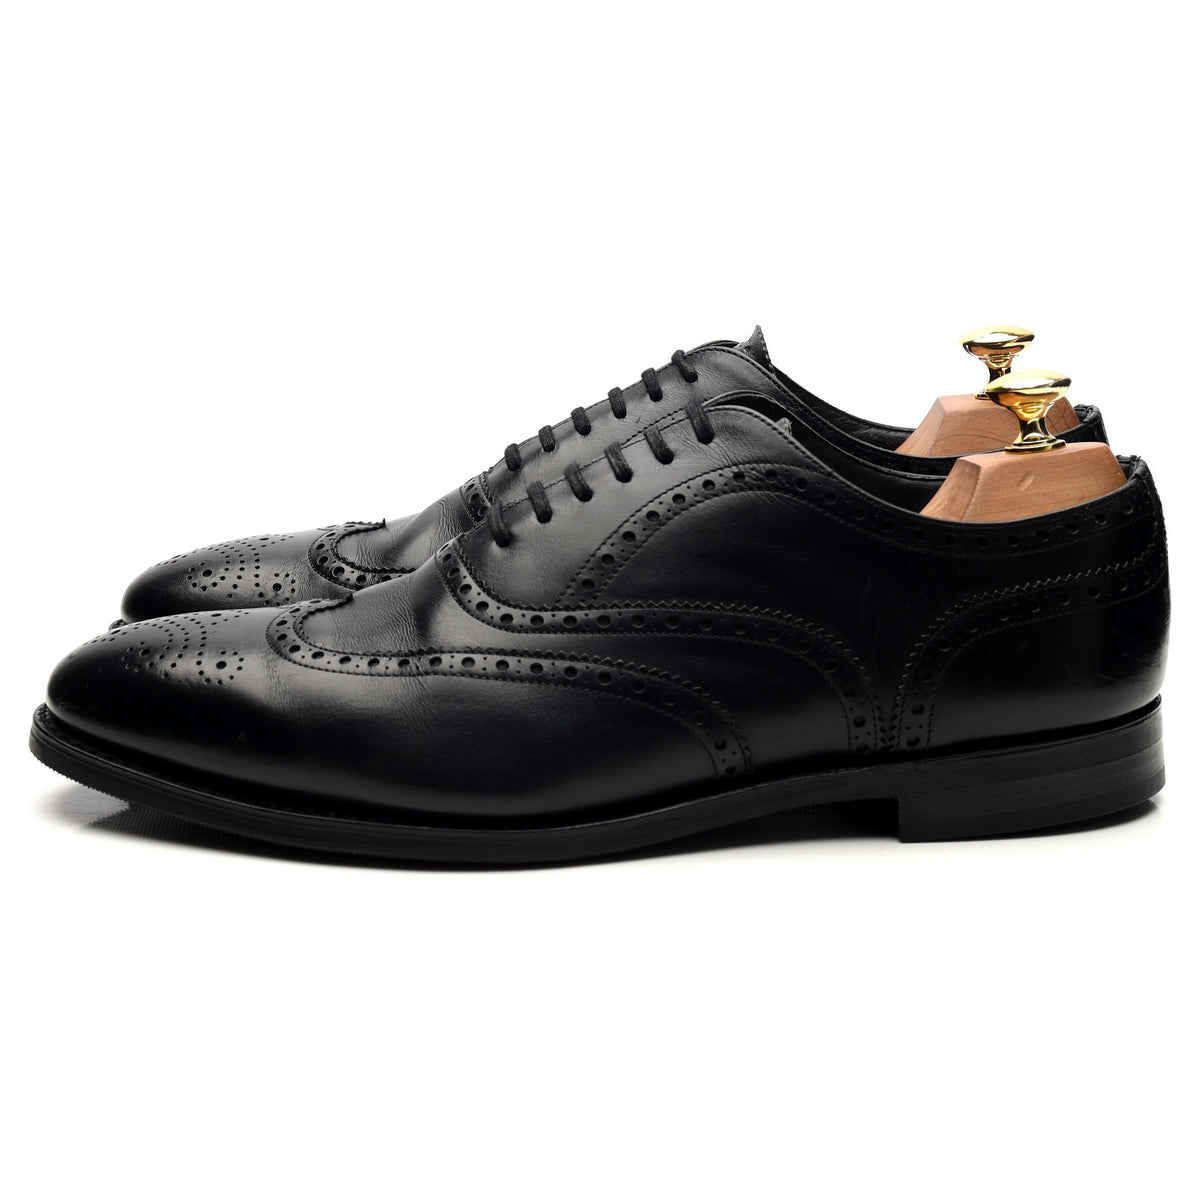 &#39;Parkstone&#39; Black Leather Oxford Brogues UK 8.5 G